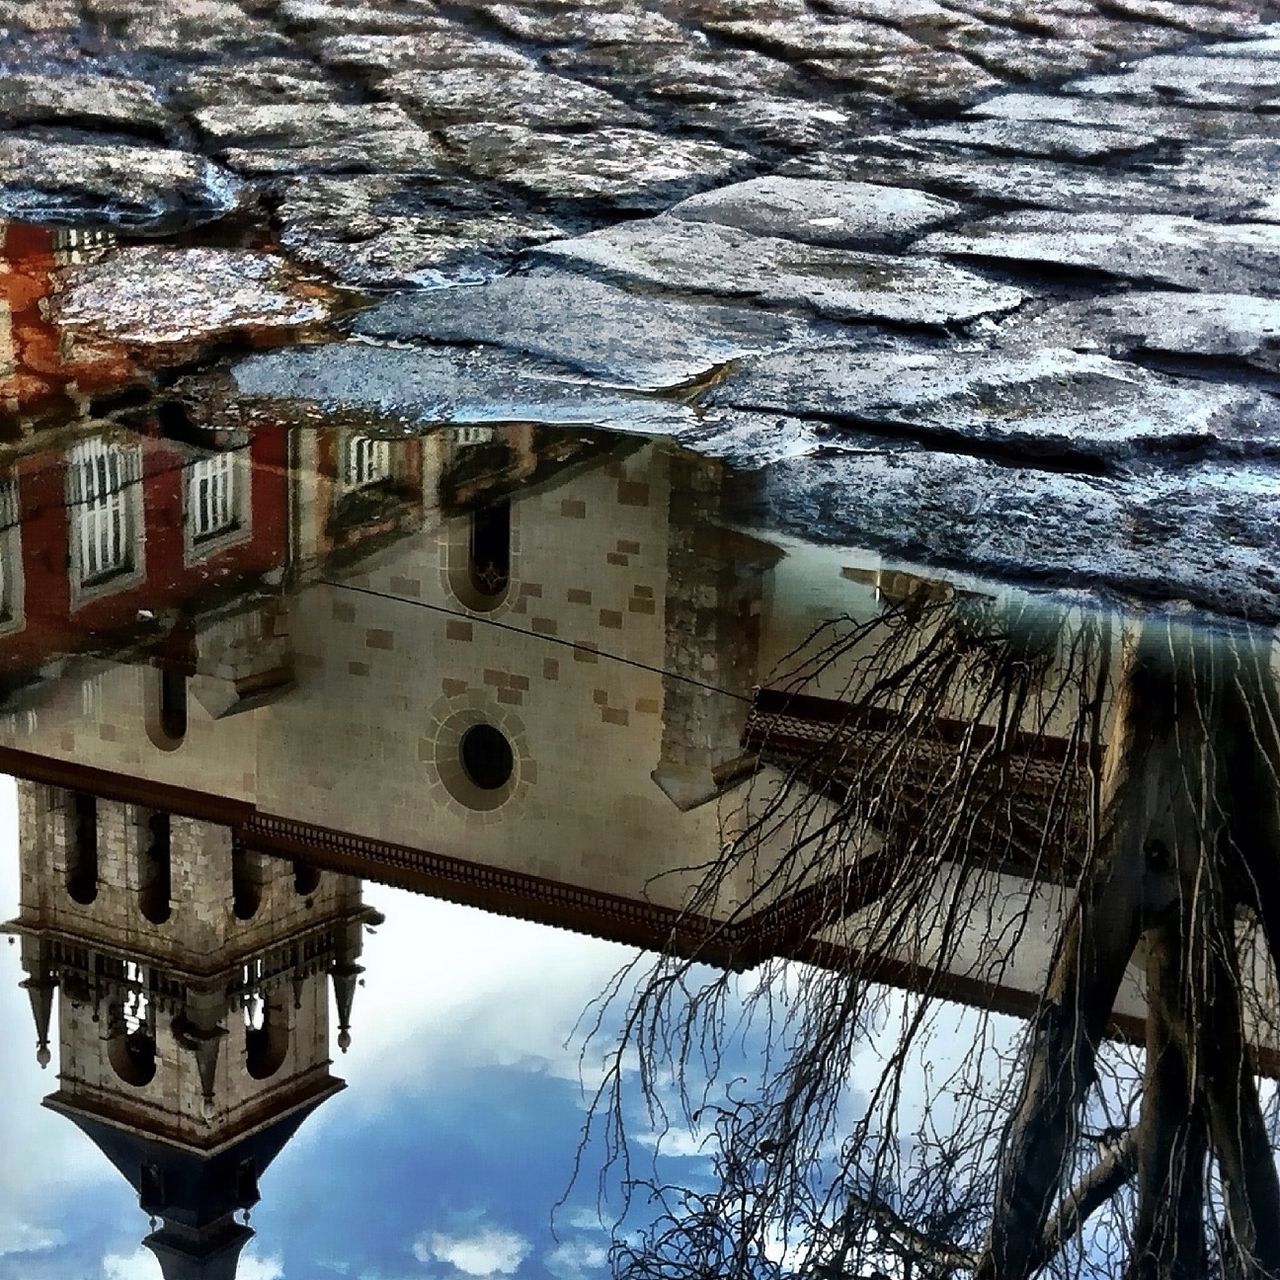 architecture, building exterior, built structure, bare tree, reflection, water, old, building, sky, puddle, outdoors, mode of transport, weather, transportation, canal, day, abandoned, city, tree, low angle view